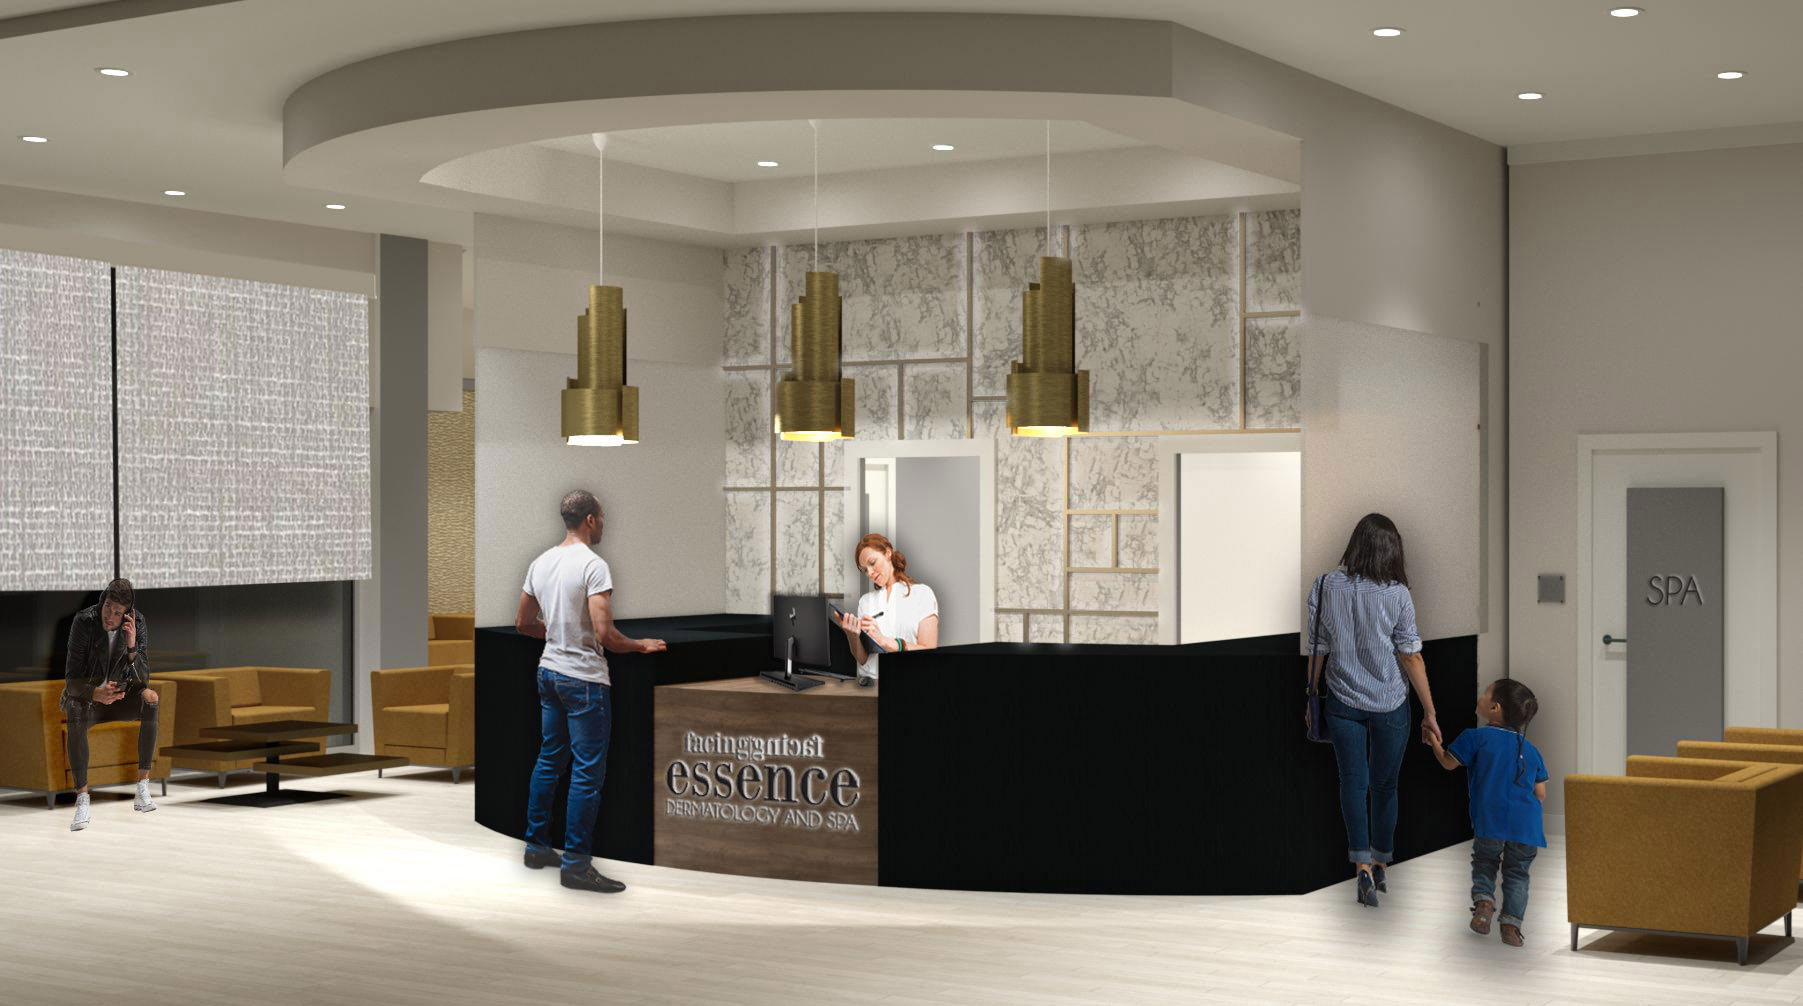 computer rendering of reception desk "facing essence dermatology and spa"